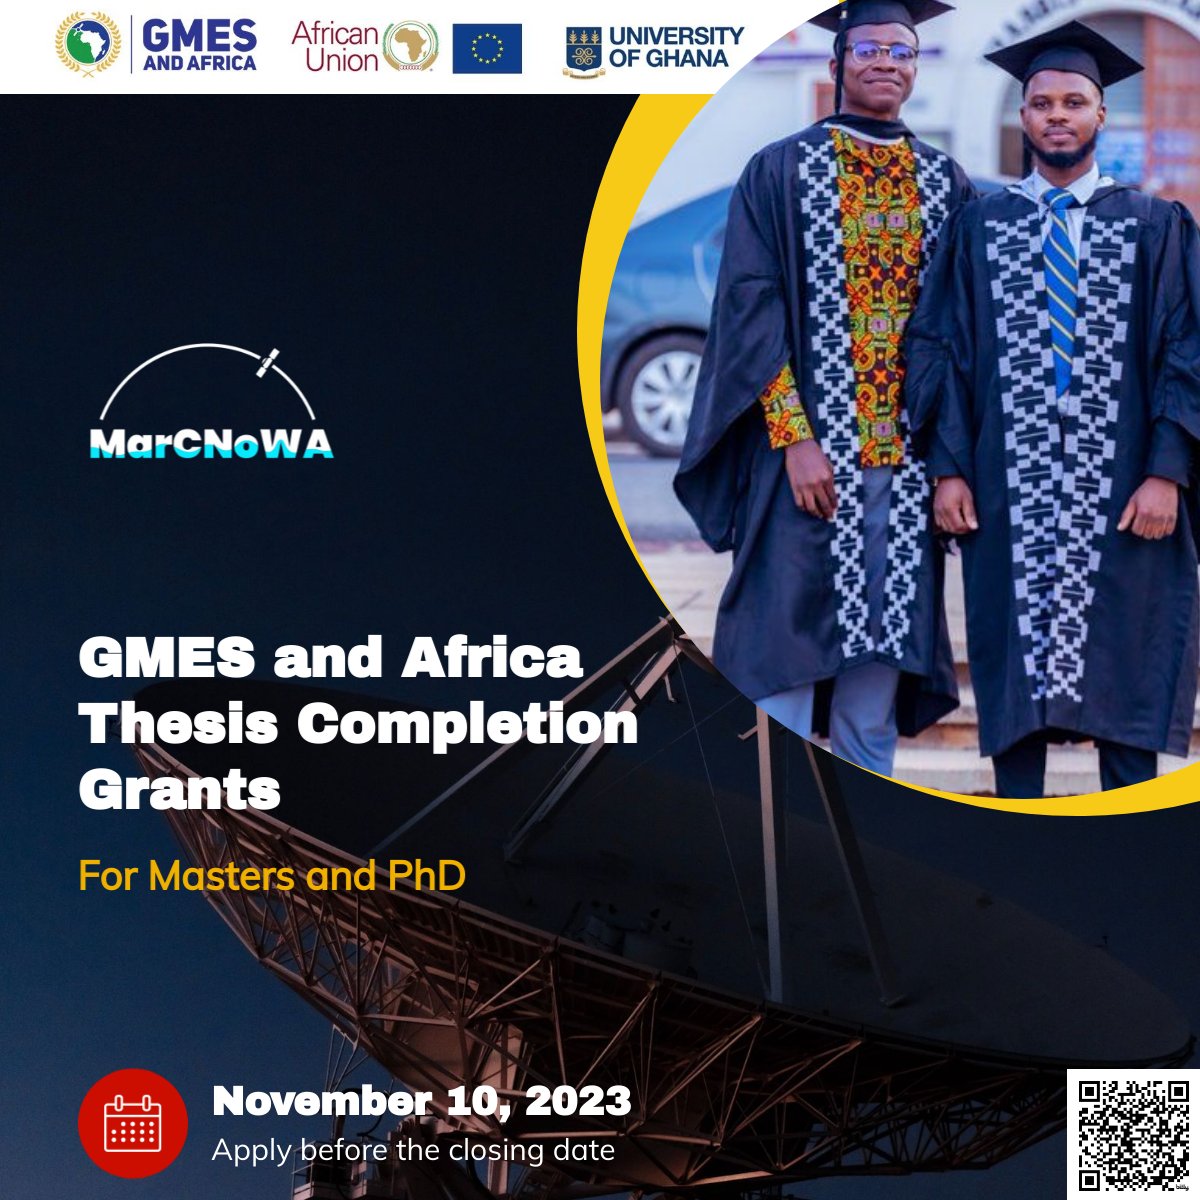 🌊 MarCNoWA/GMES & Africa offer up to €4K in grants for postgrads in Marine Science, Oceanography & more! Apply now to advance coastal & marine management in N/W Africa. #MarineResearch #AfricaScholarship #EOdata #GMESAfrica #MarCNoWA #Grants

Apply Now: bit.ly/MarCNoWA2023Gr…